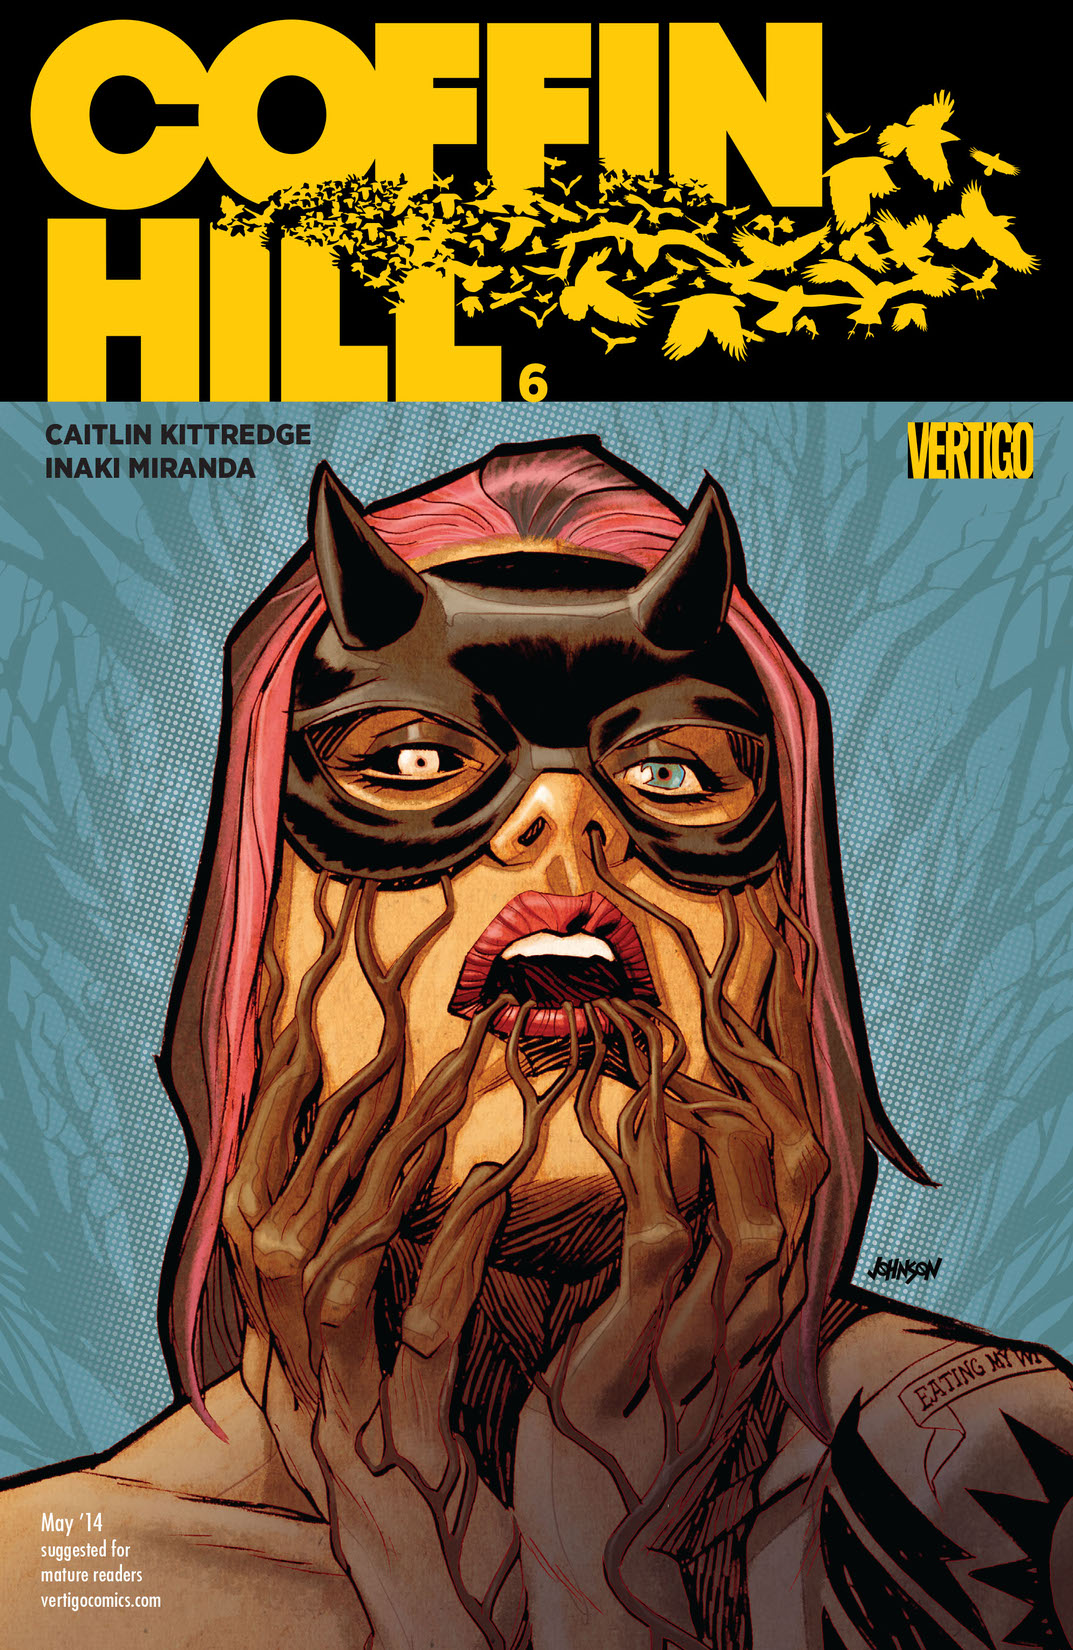 Coffin Hill #6 preview images